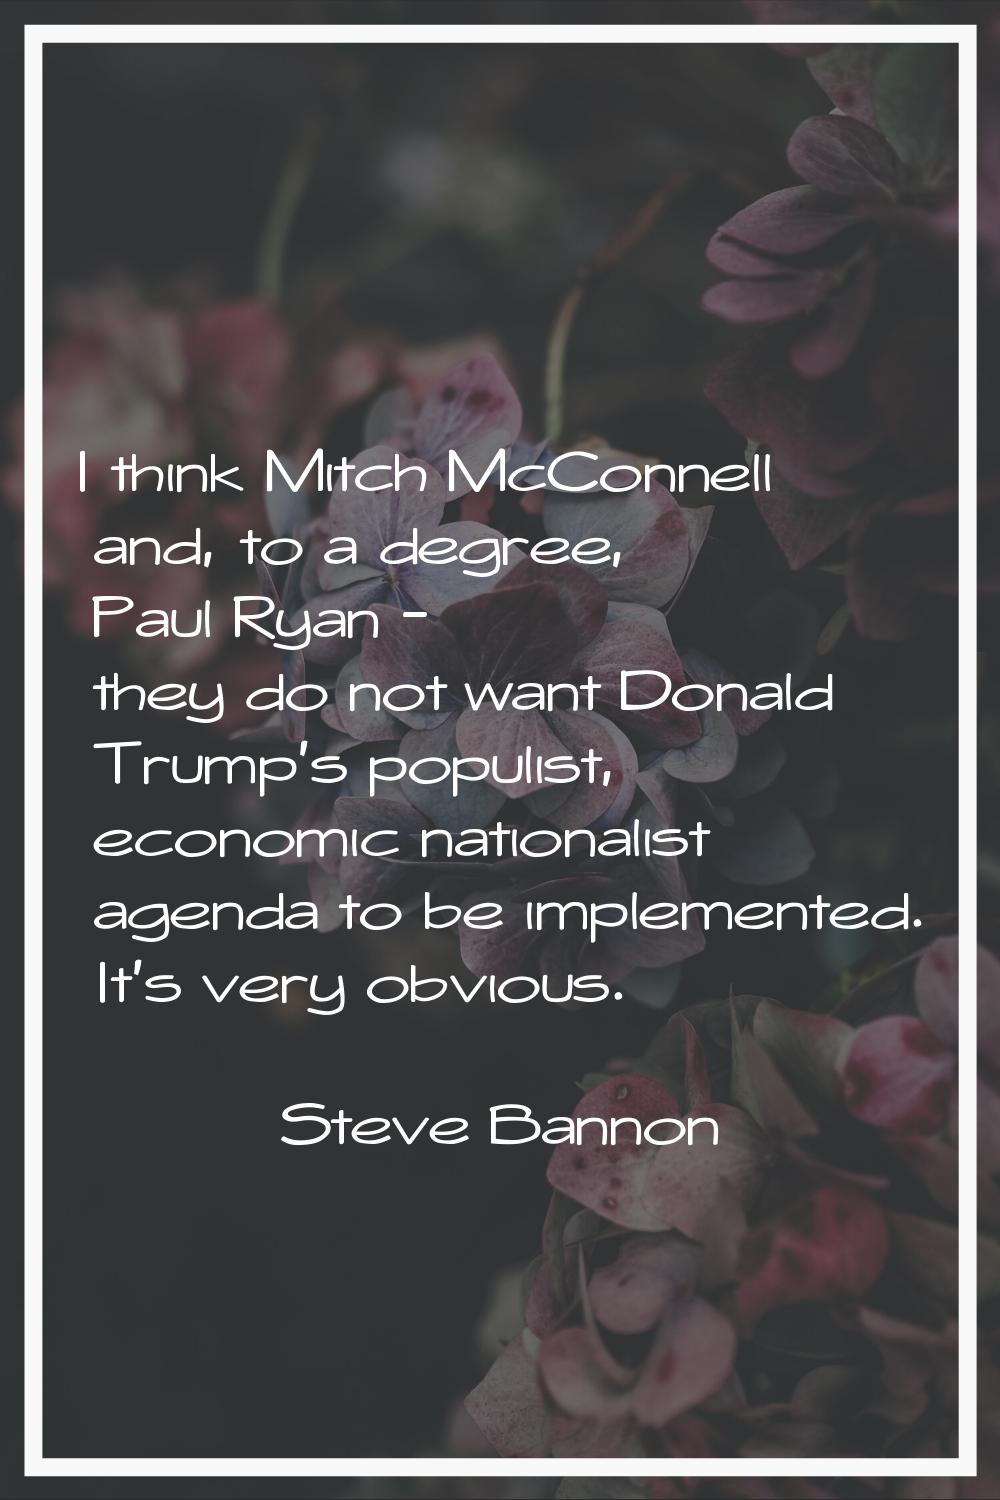 I think Mitch McConnell and, to a degree, Paul Ryan - they do not want Donald Trump's populist, eco